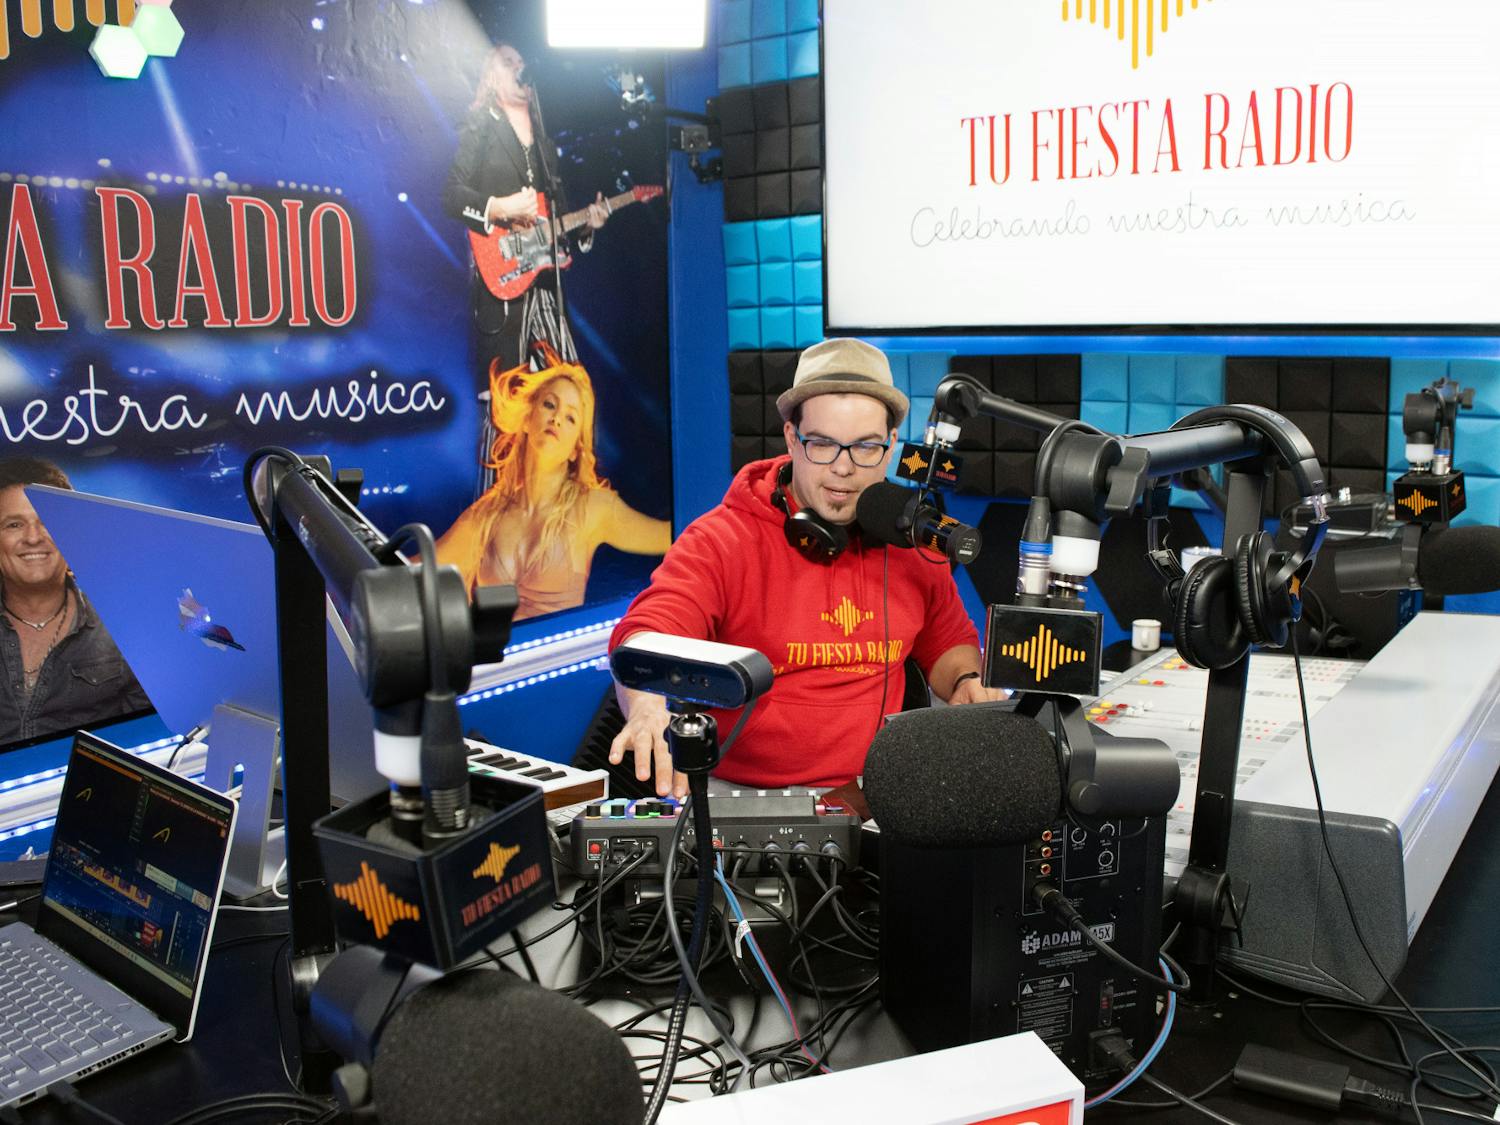 Radio host Elio Piedra announces the next song to be played to listeners of Tu Fiesta Radio Thursday, March 2, 2023. 